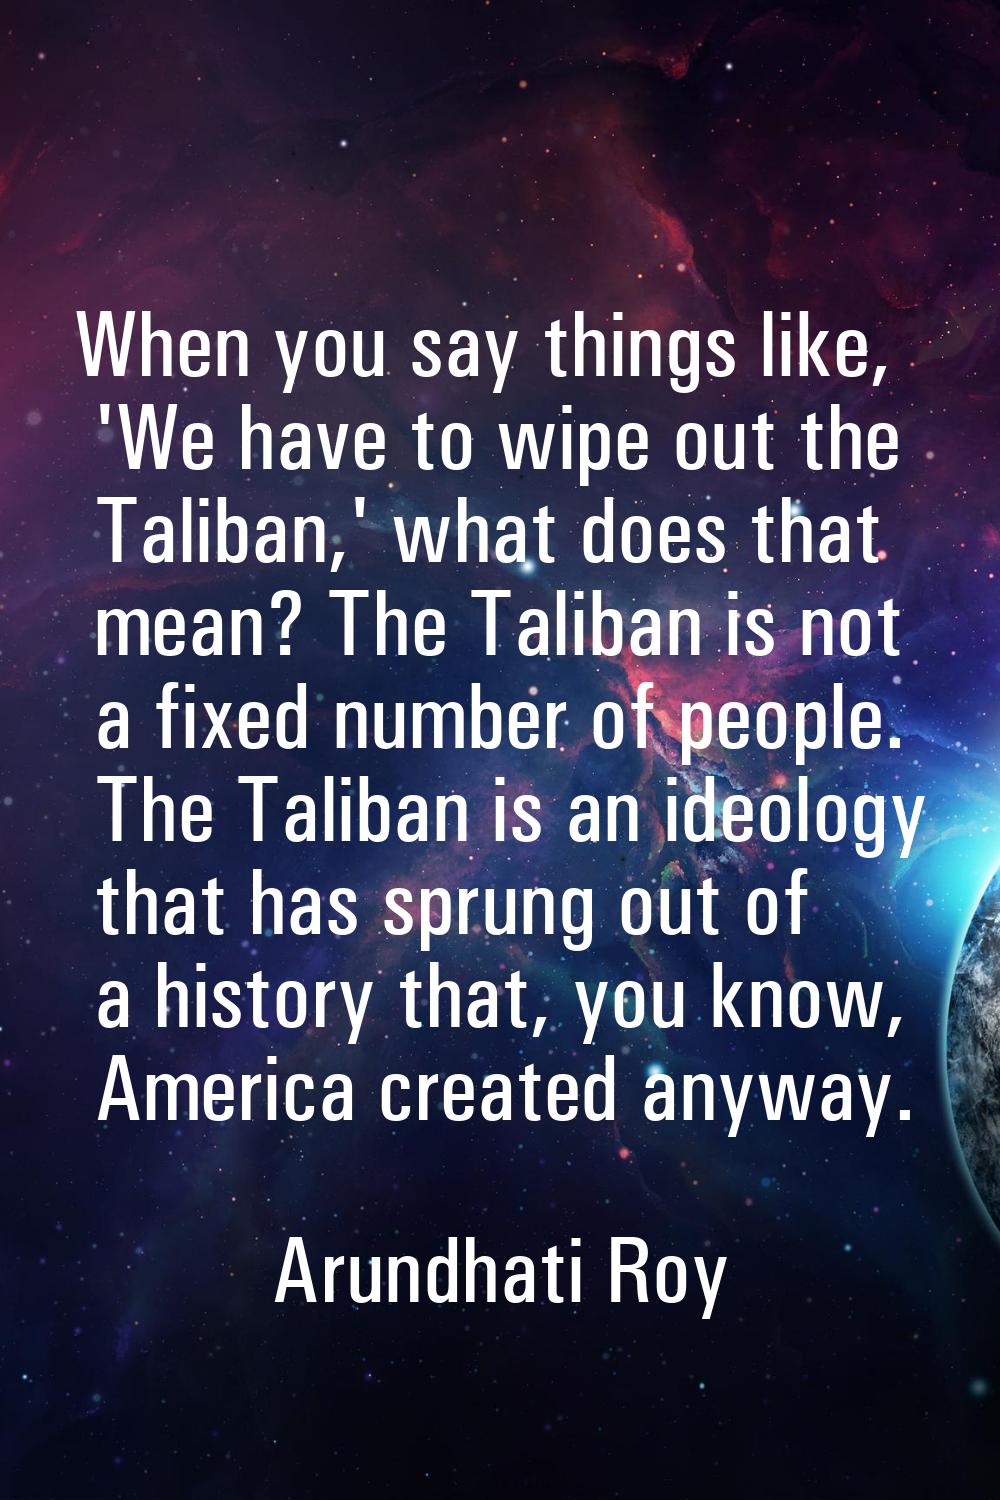 When you say things like, 'We have to wipe out the Taliban,' what does that mean? The Taliban is no